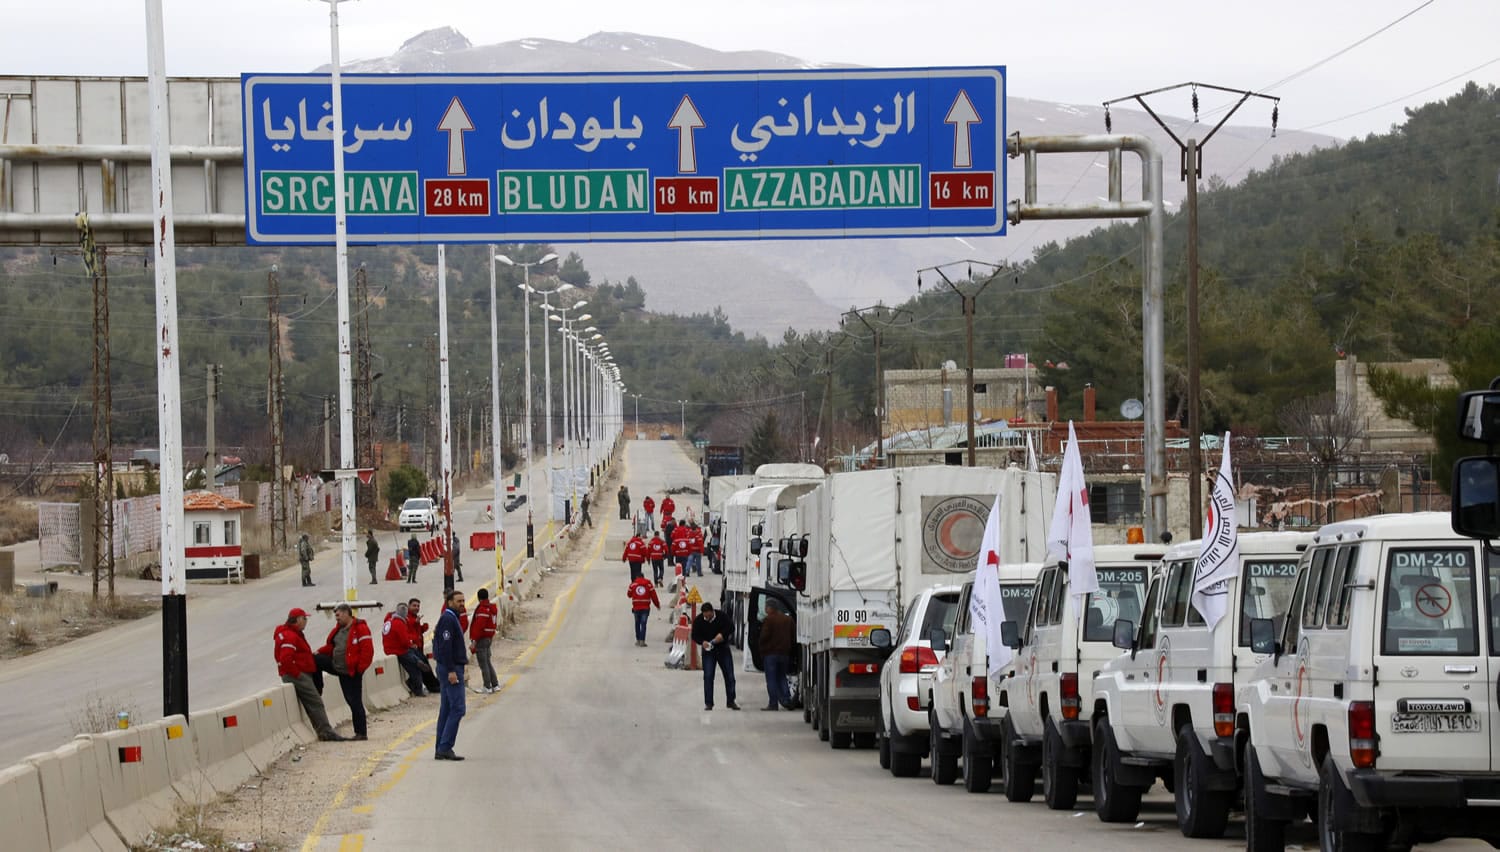 A convoy of vehicles loaded with food and other supplies organized by the International Committee of the Red Cross, working with the Syrian Arab Red Crescent and the United Nations, makes its way Monday to the besieged town of Madaya, about 15 miles northwest of Damascus, Syria.